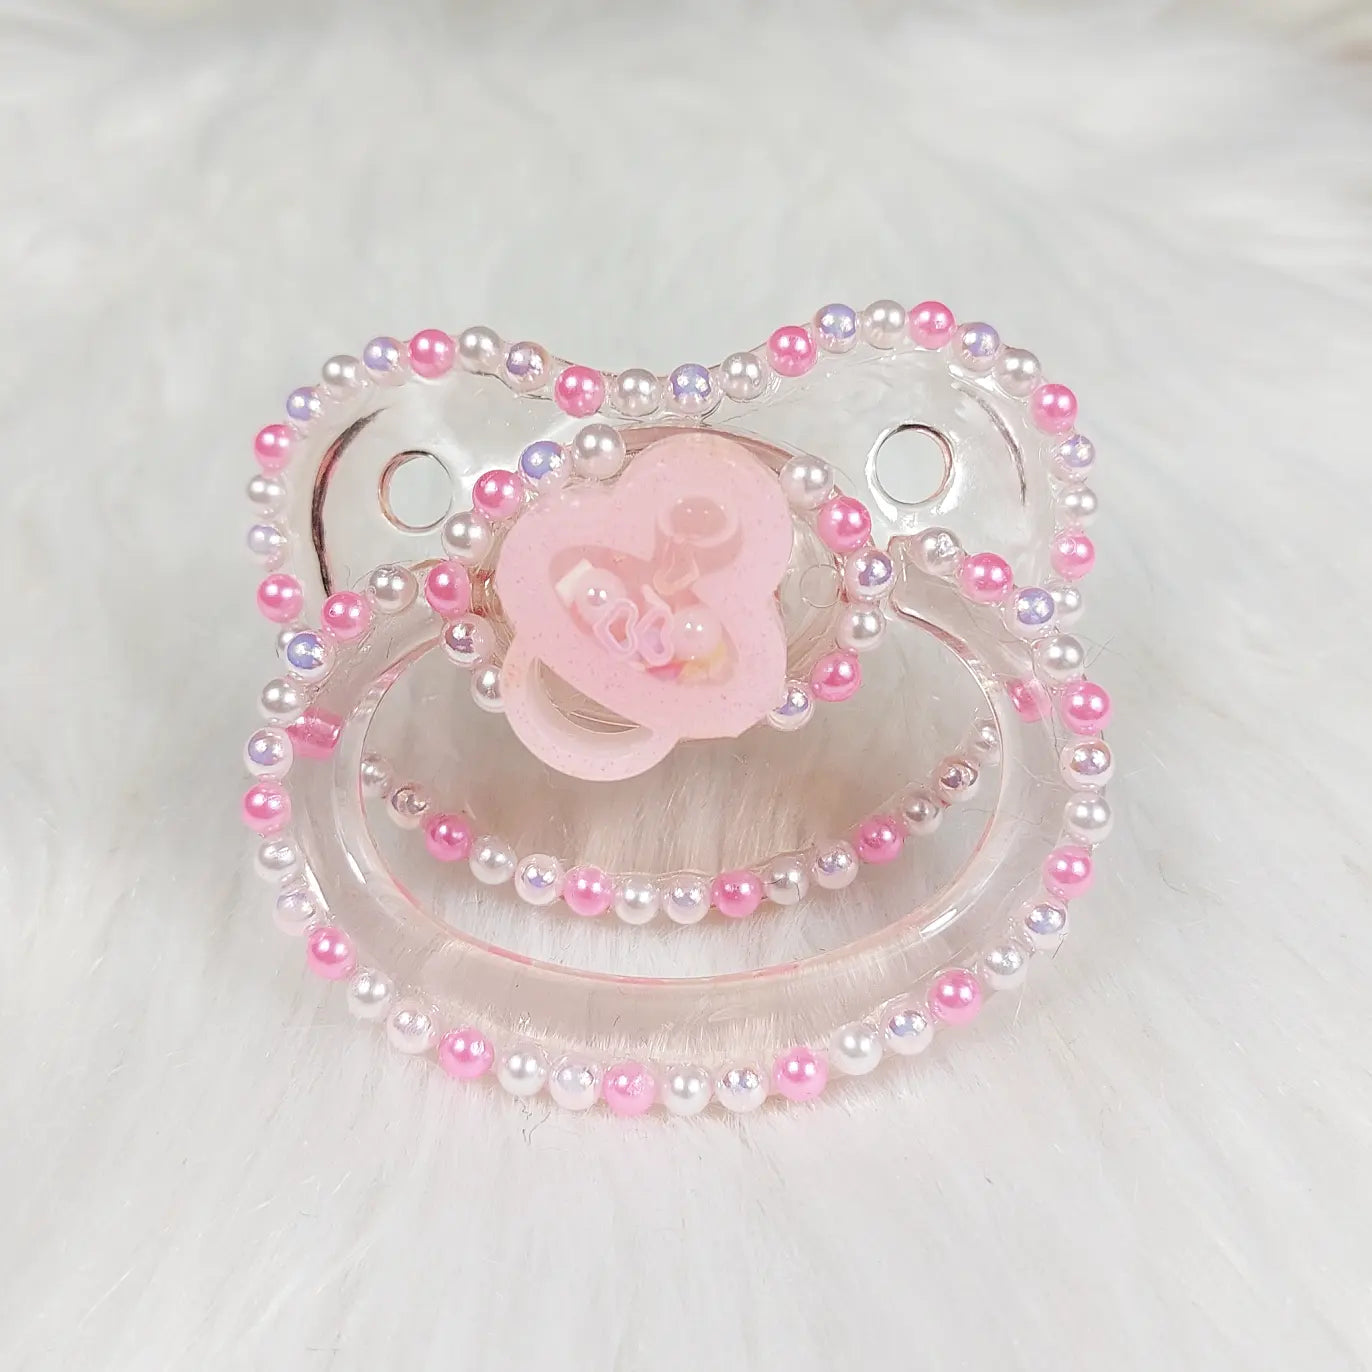 "Baby Pink" Adult Paci